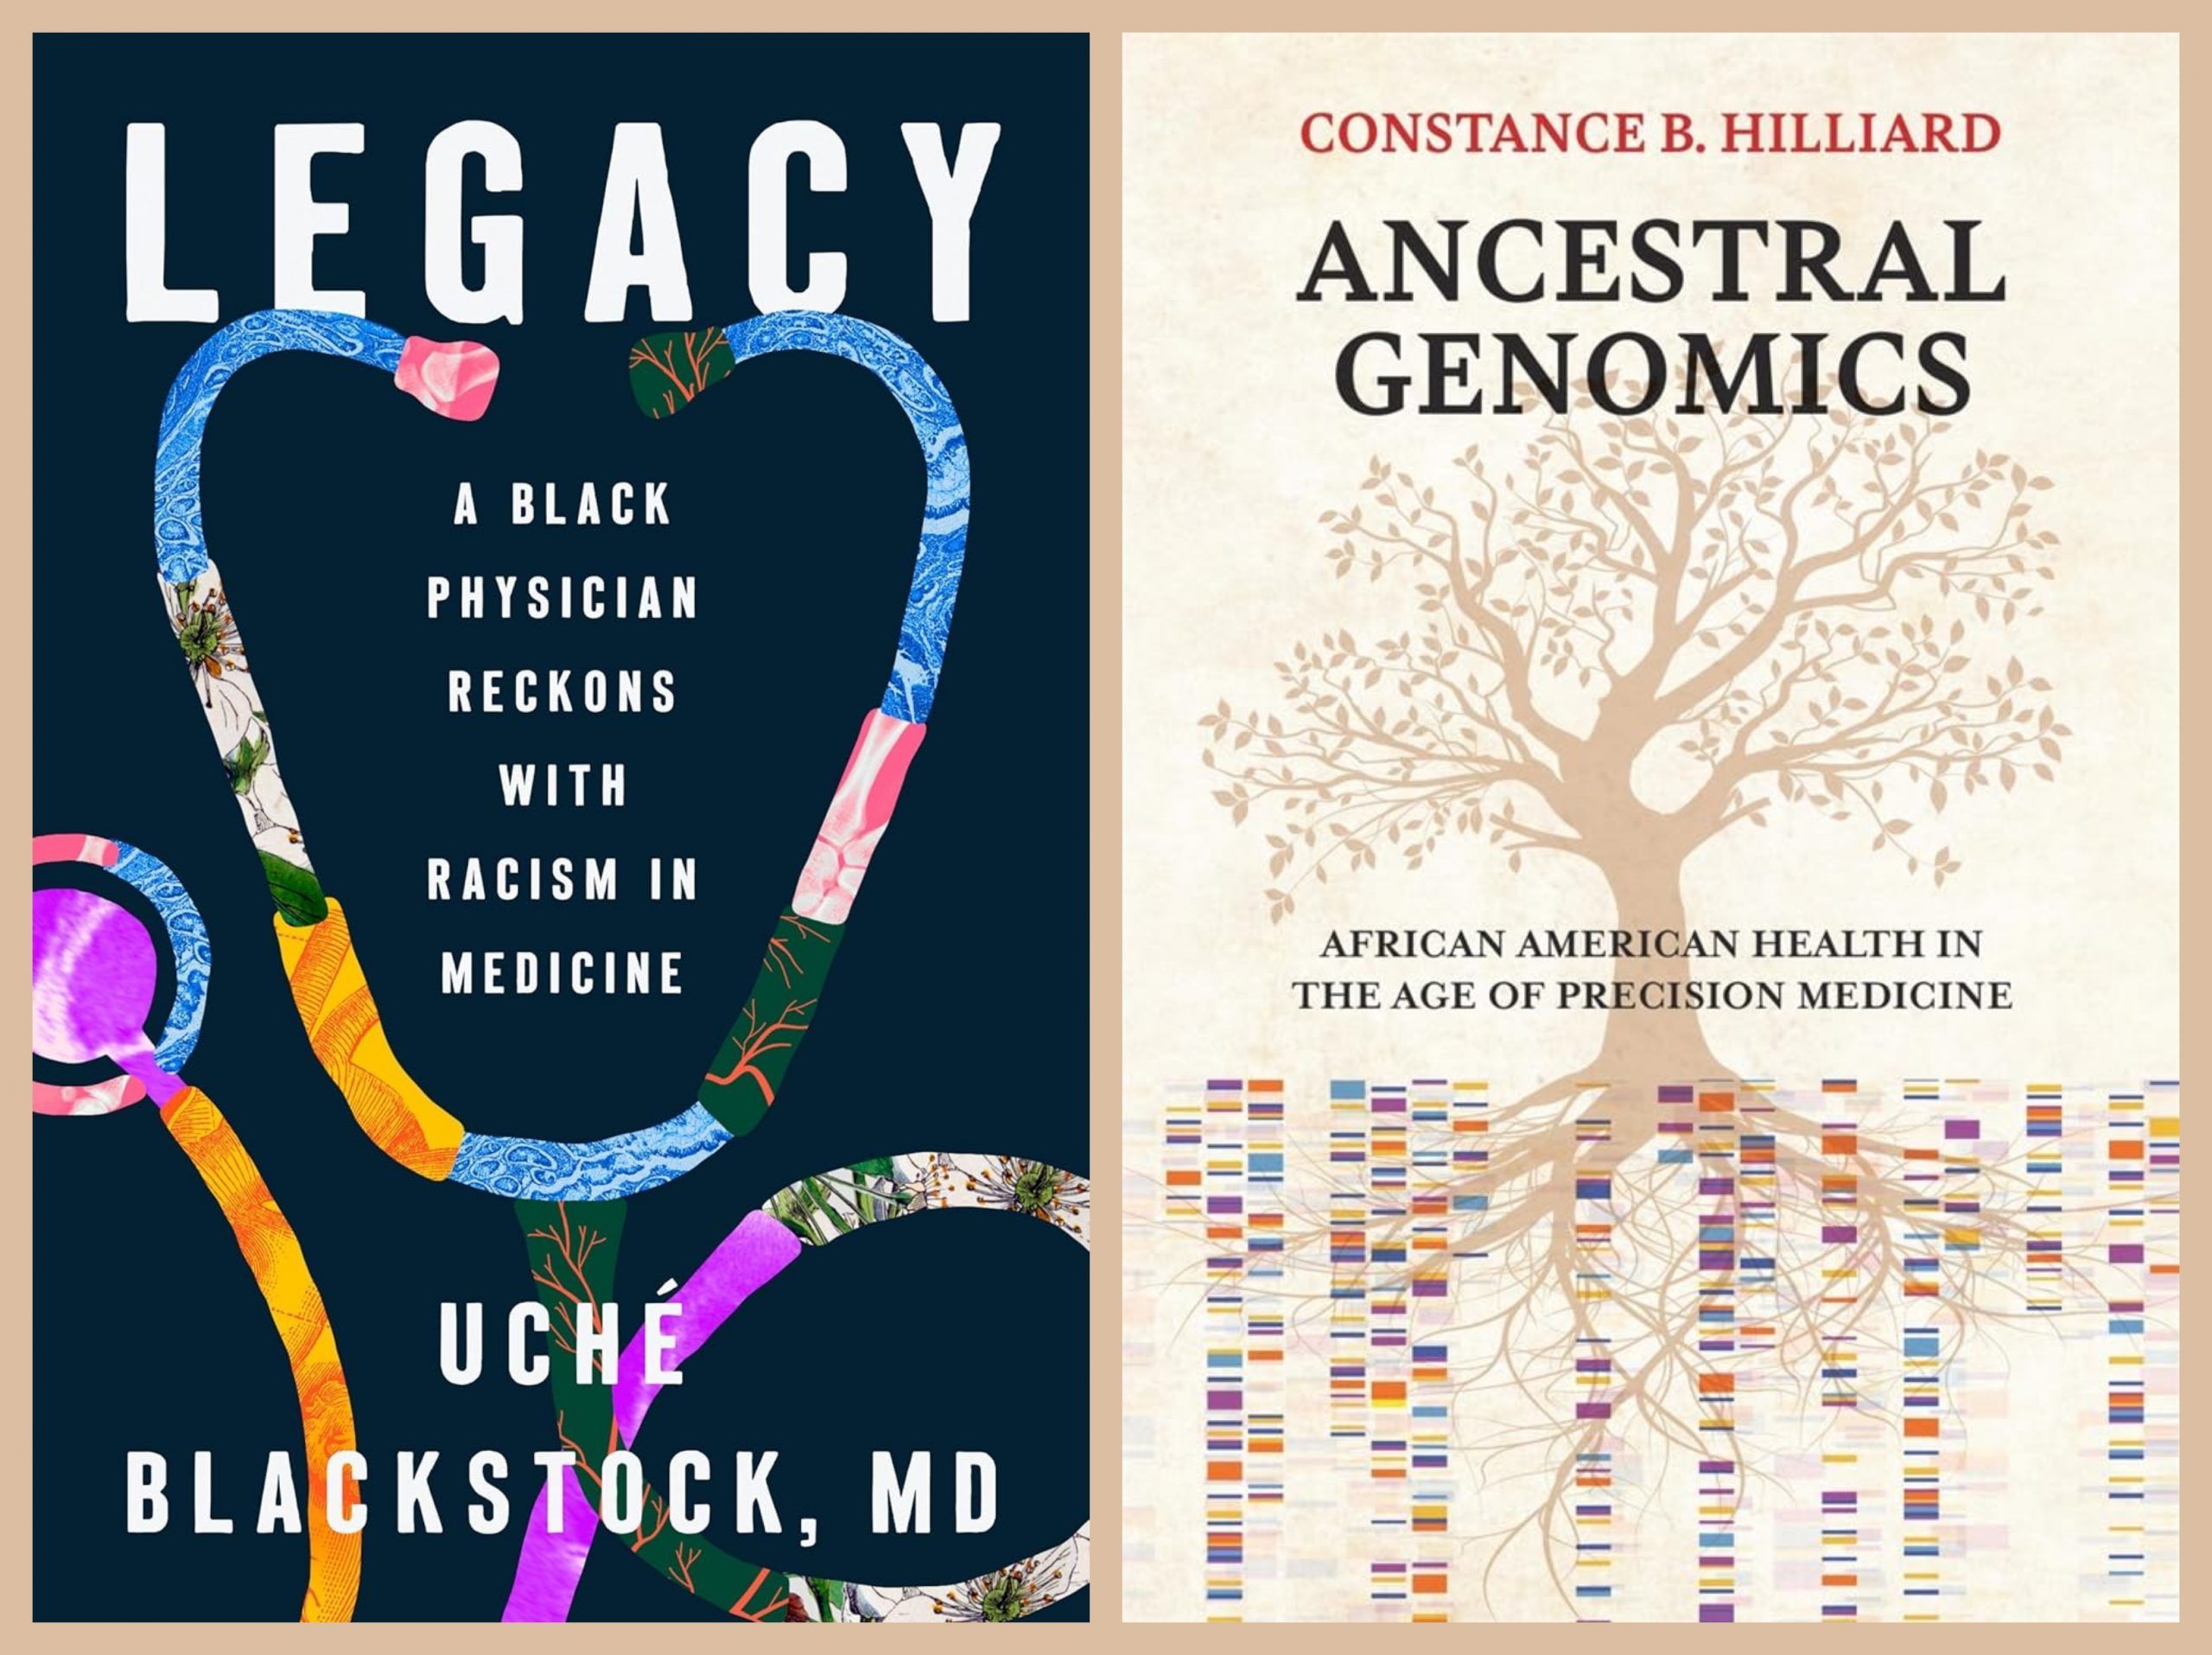 Misinformed Care: On Uché Blackstock’s “Legacy” and Constance Hilliard’s “Ancestral Genomics”